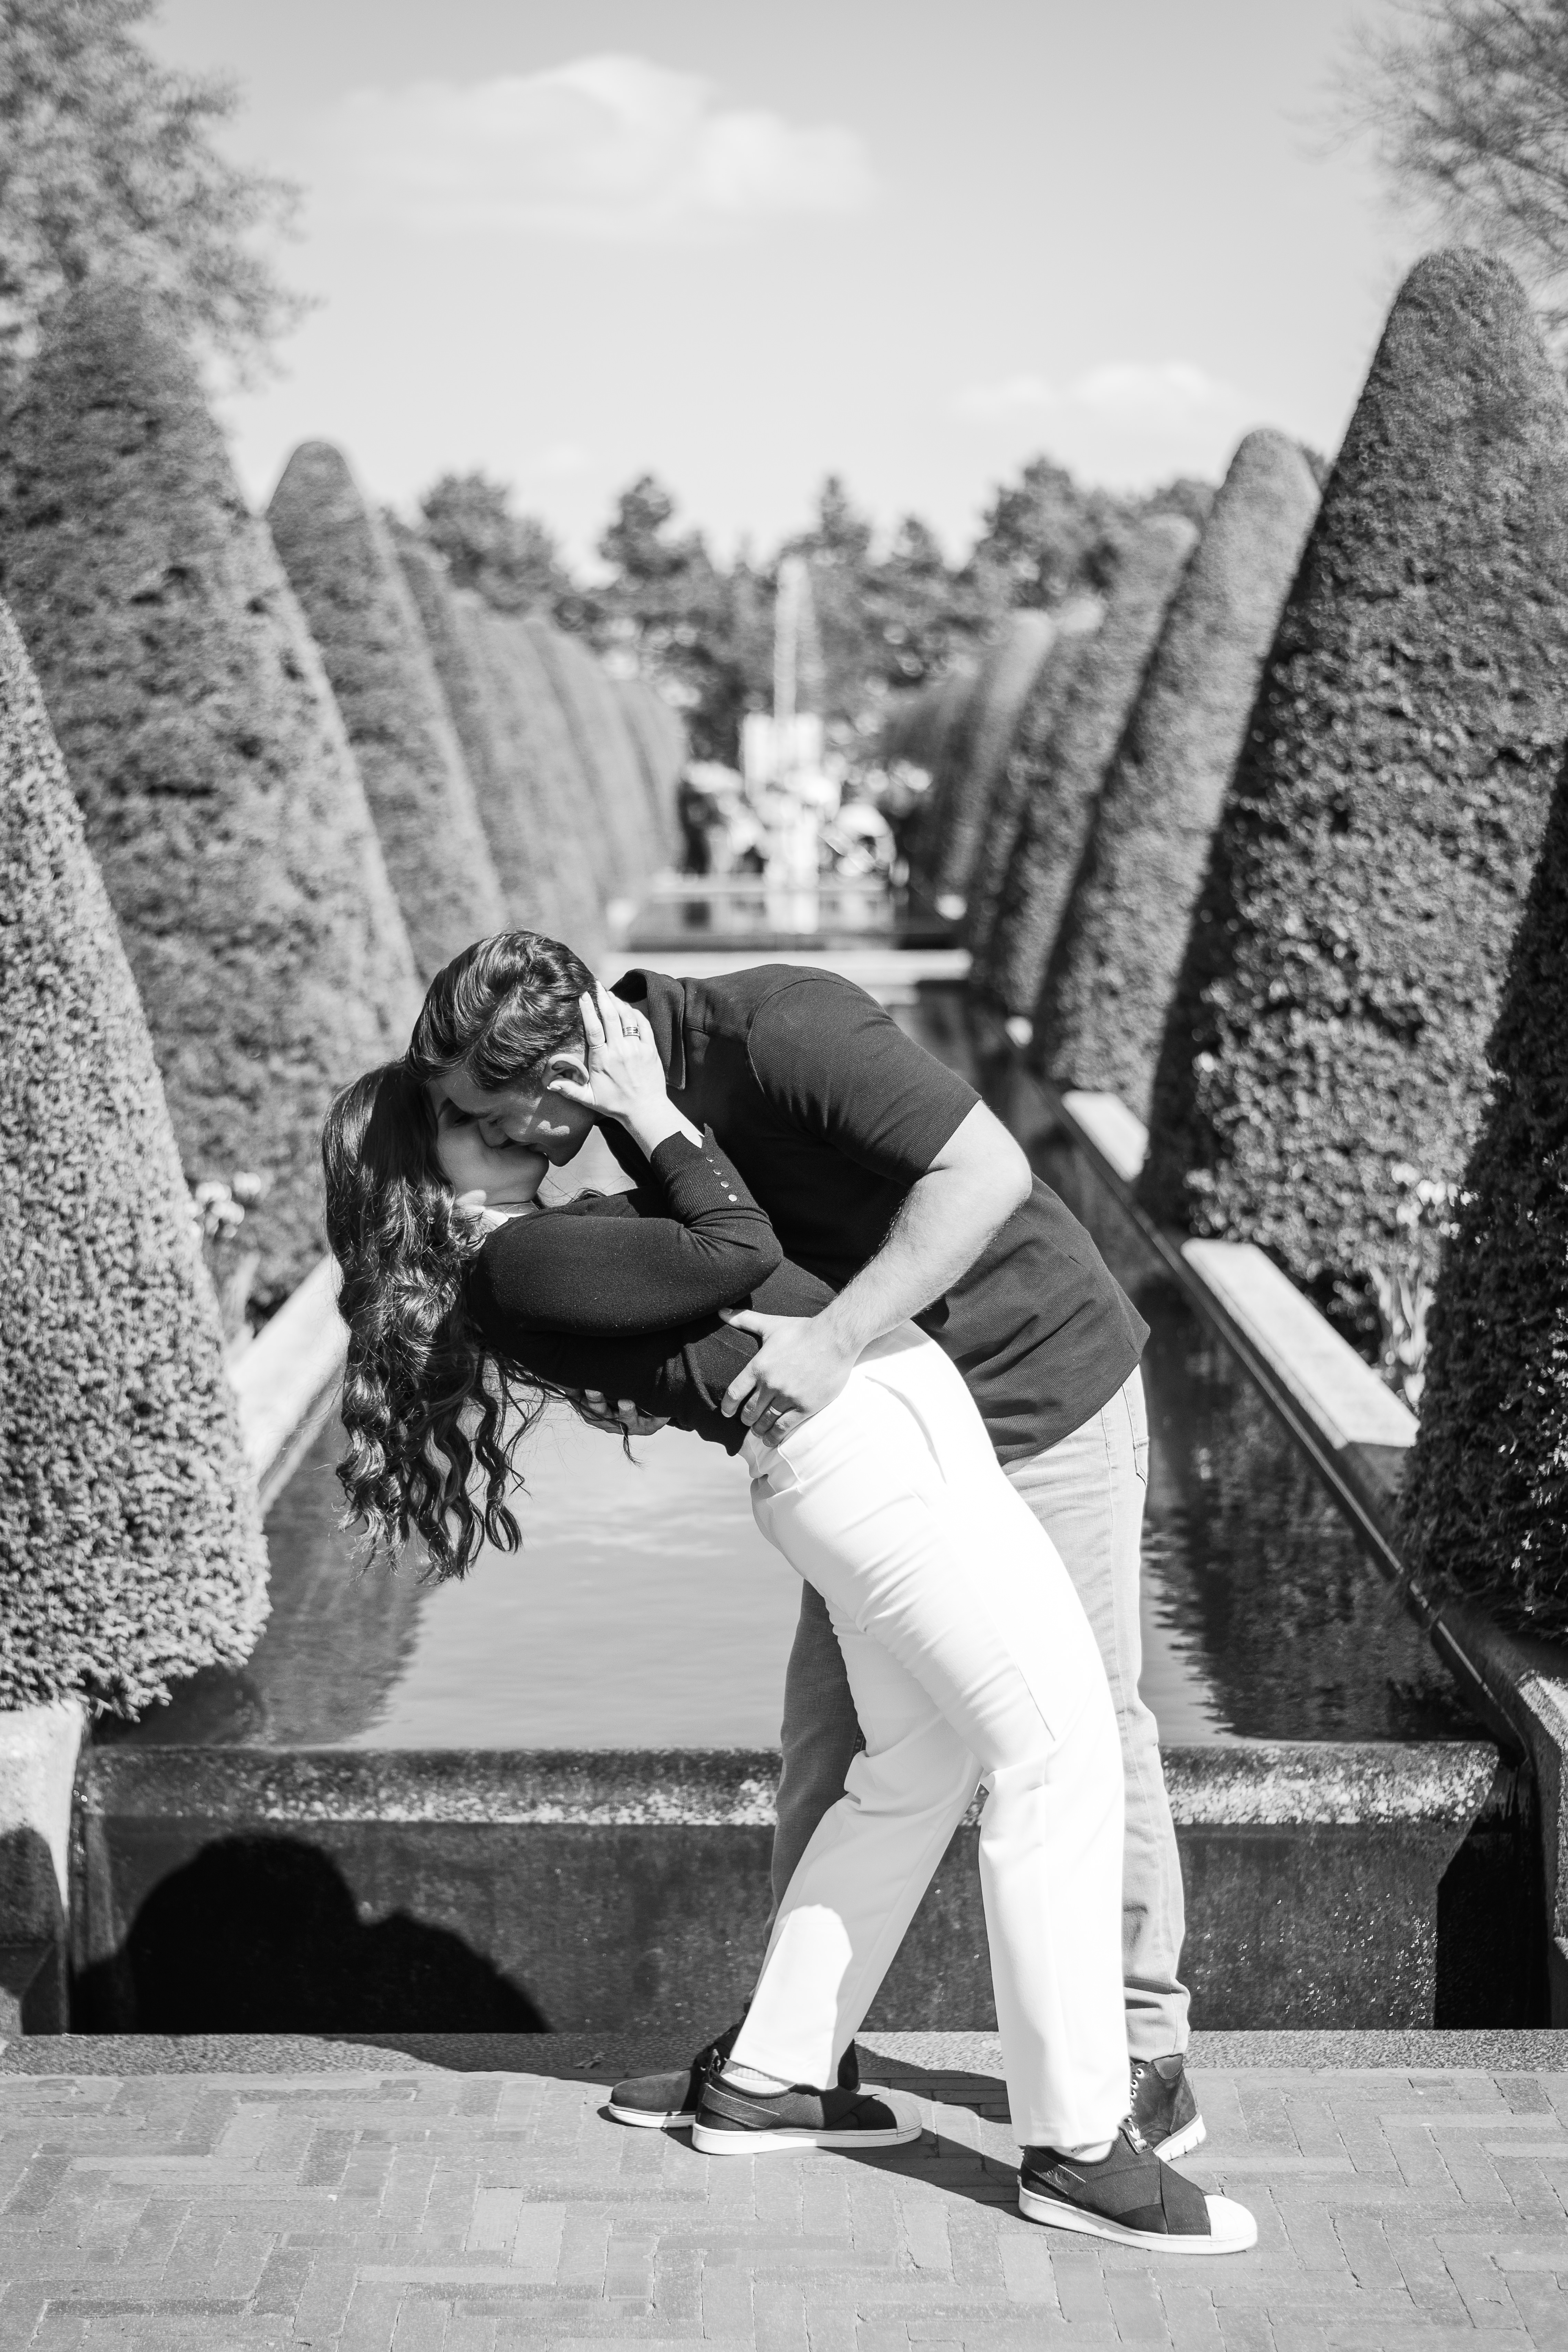 Black and white image of a man dipping a woman back to kiss her in front of a long row of trees and a water fountain